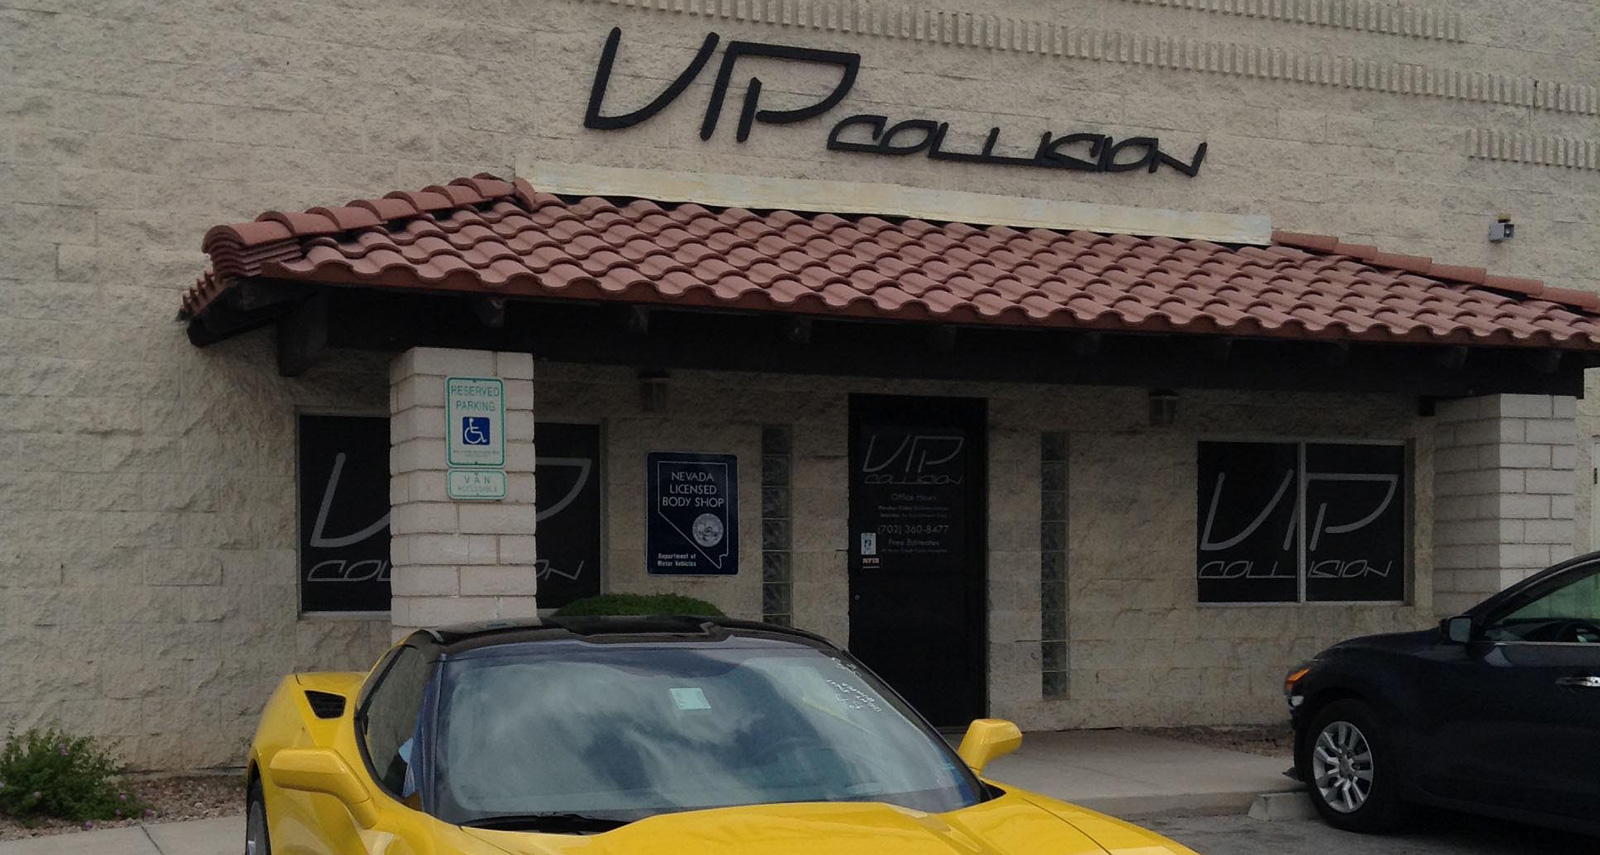 Exceptional Auto Body Repair Solutions at Las Vegas by VIP Collision